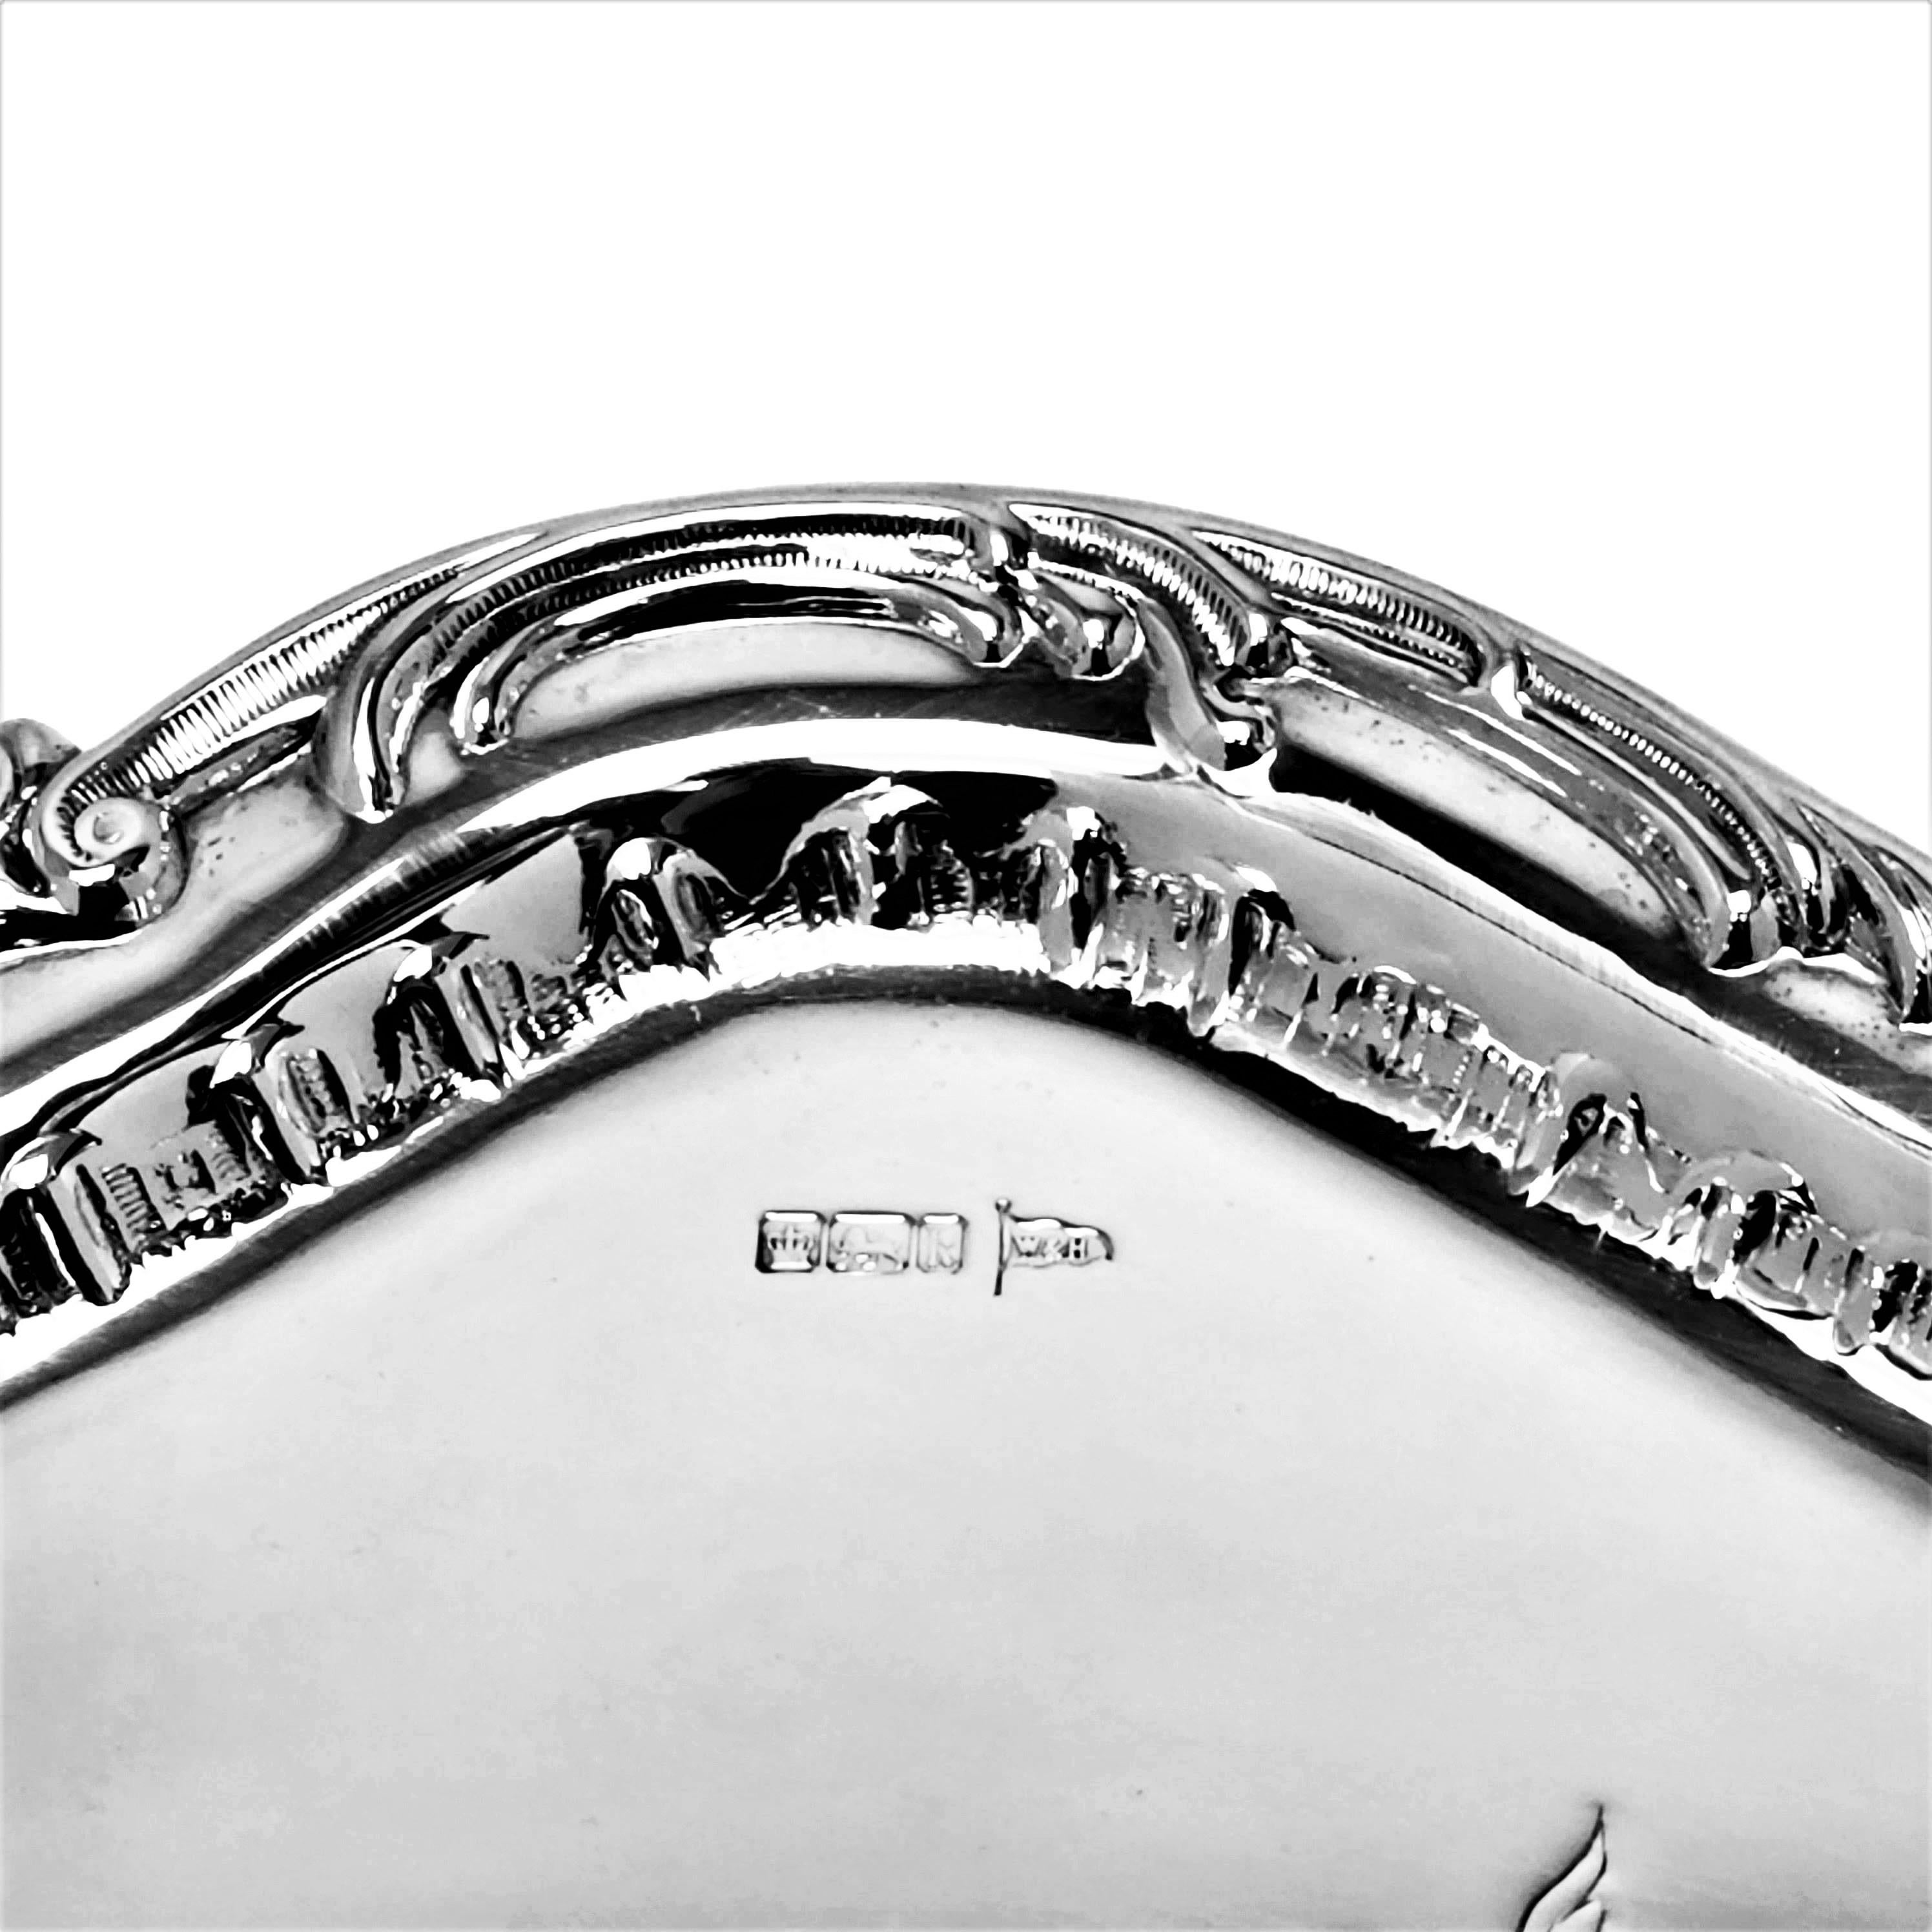 Antique Rococo Style Sterling Silver Salver Platter Tray 1902 For Sale 1